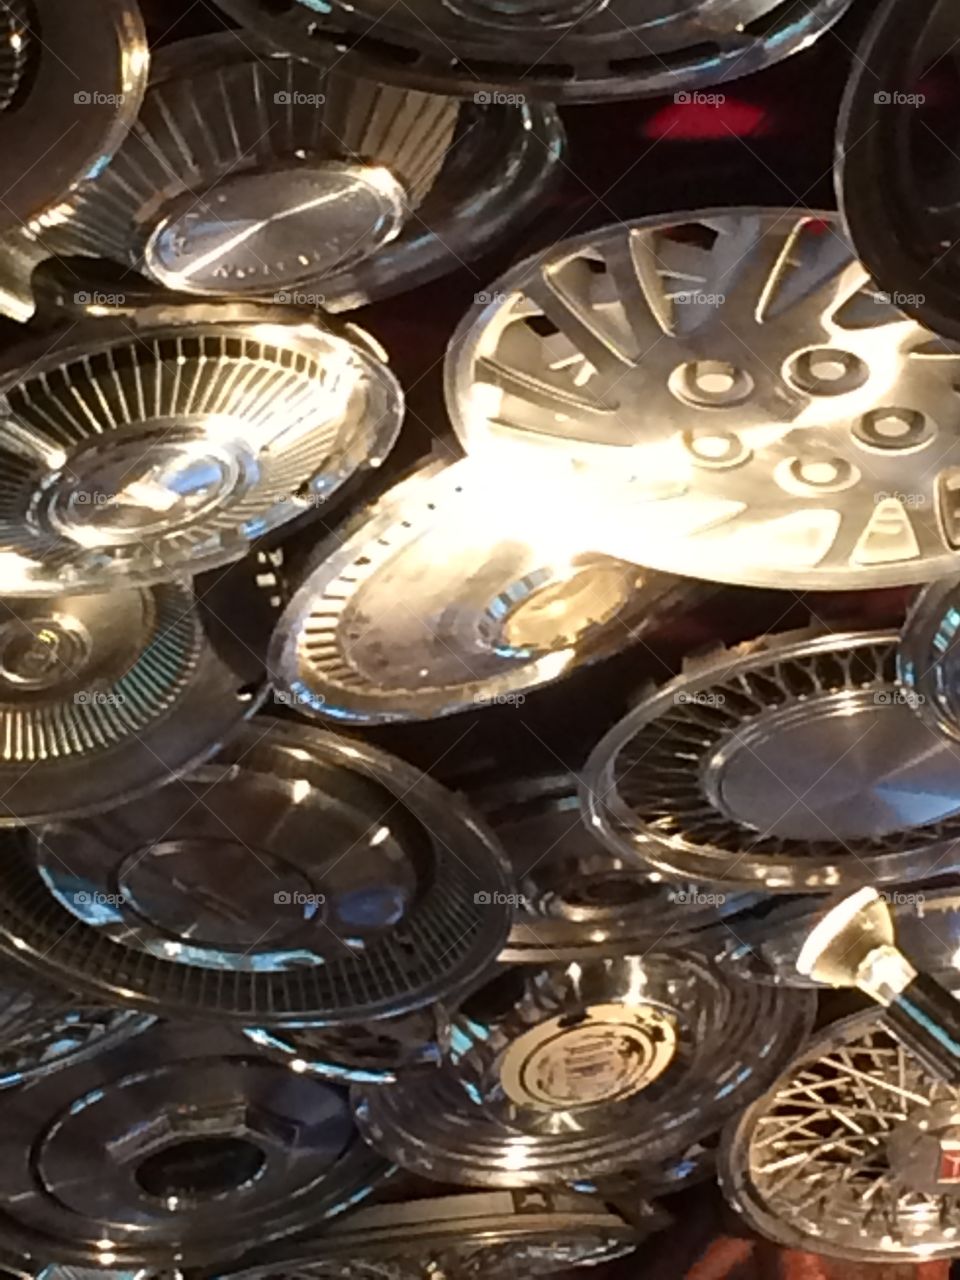 Hubcap ceiling at restaurant . Small oration of the ceiling at Chuy's 